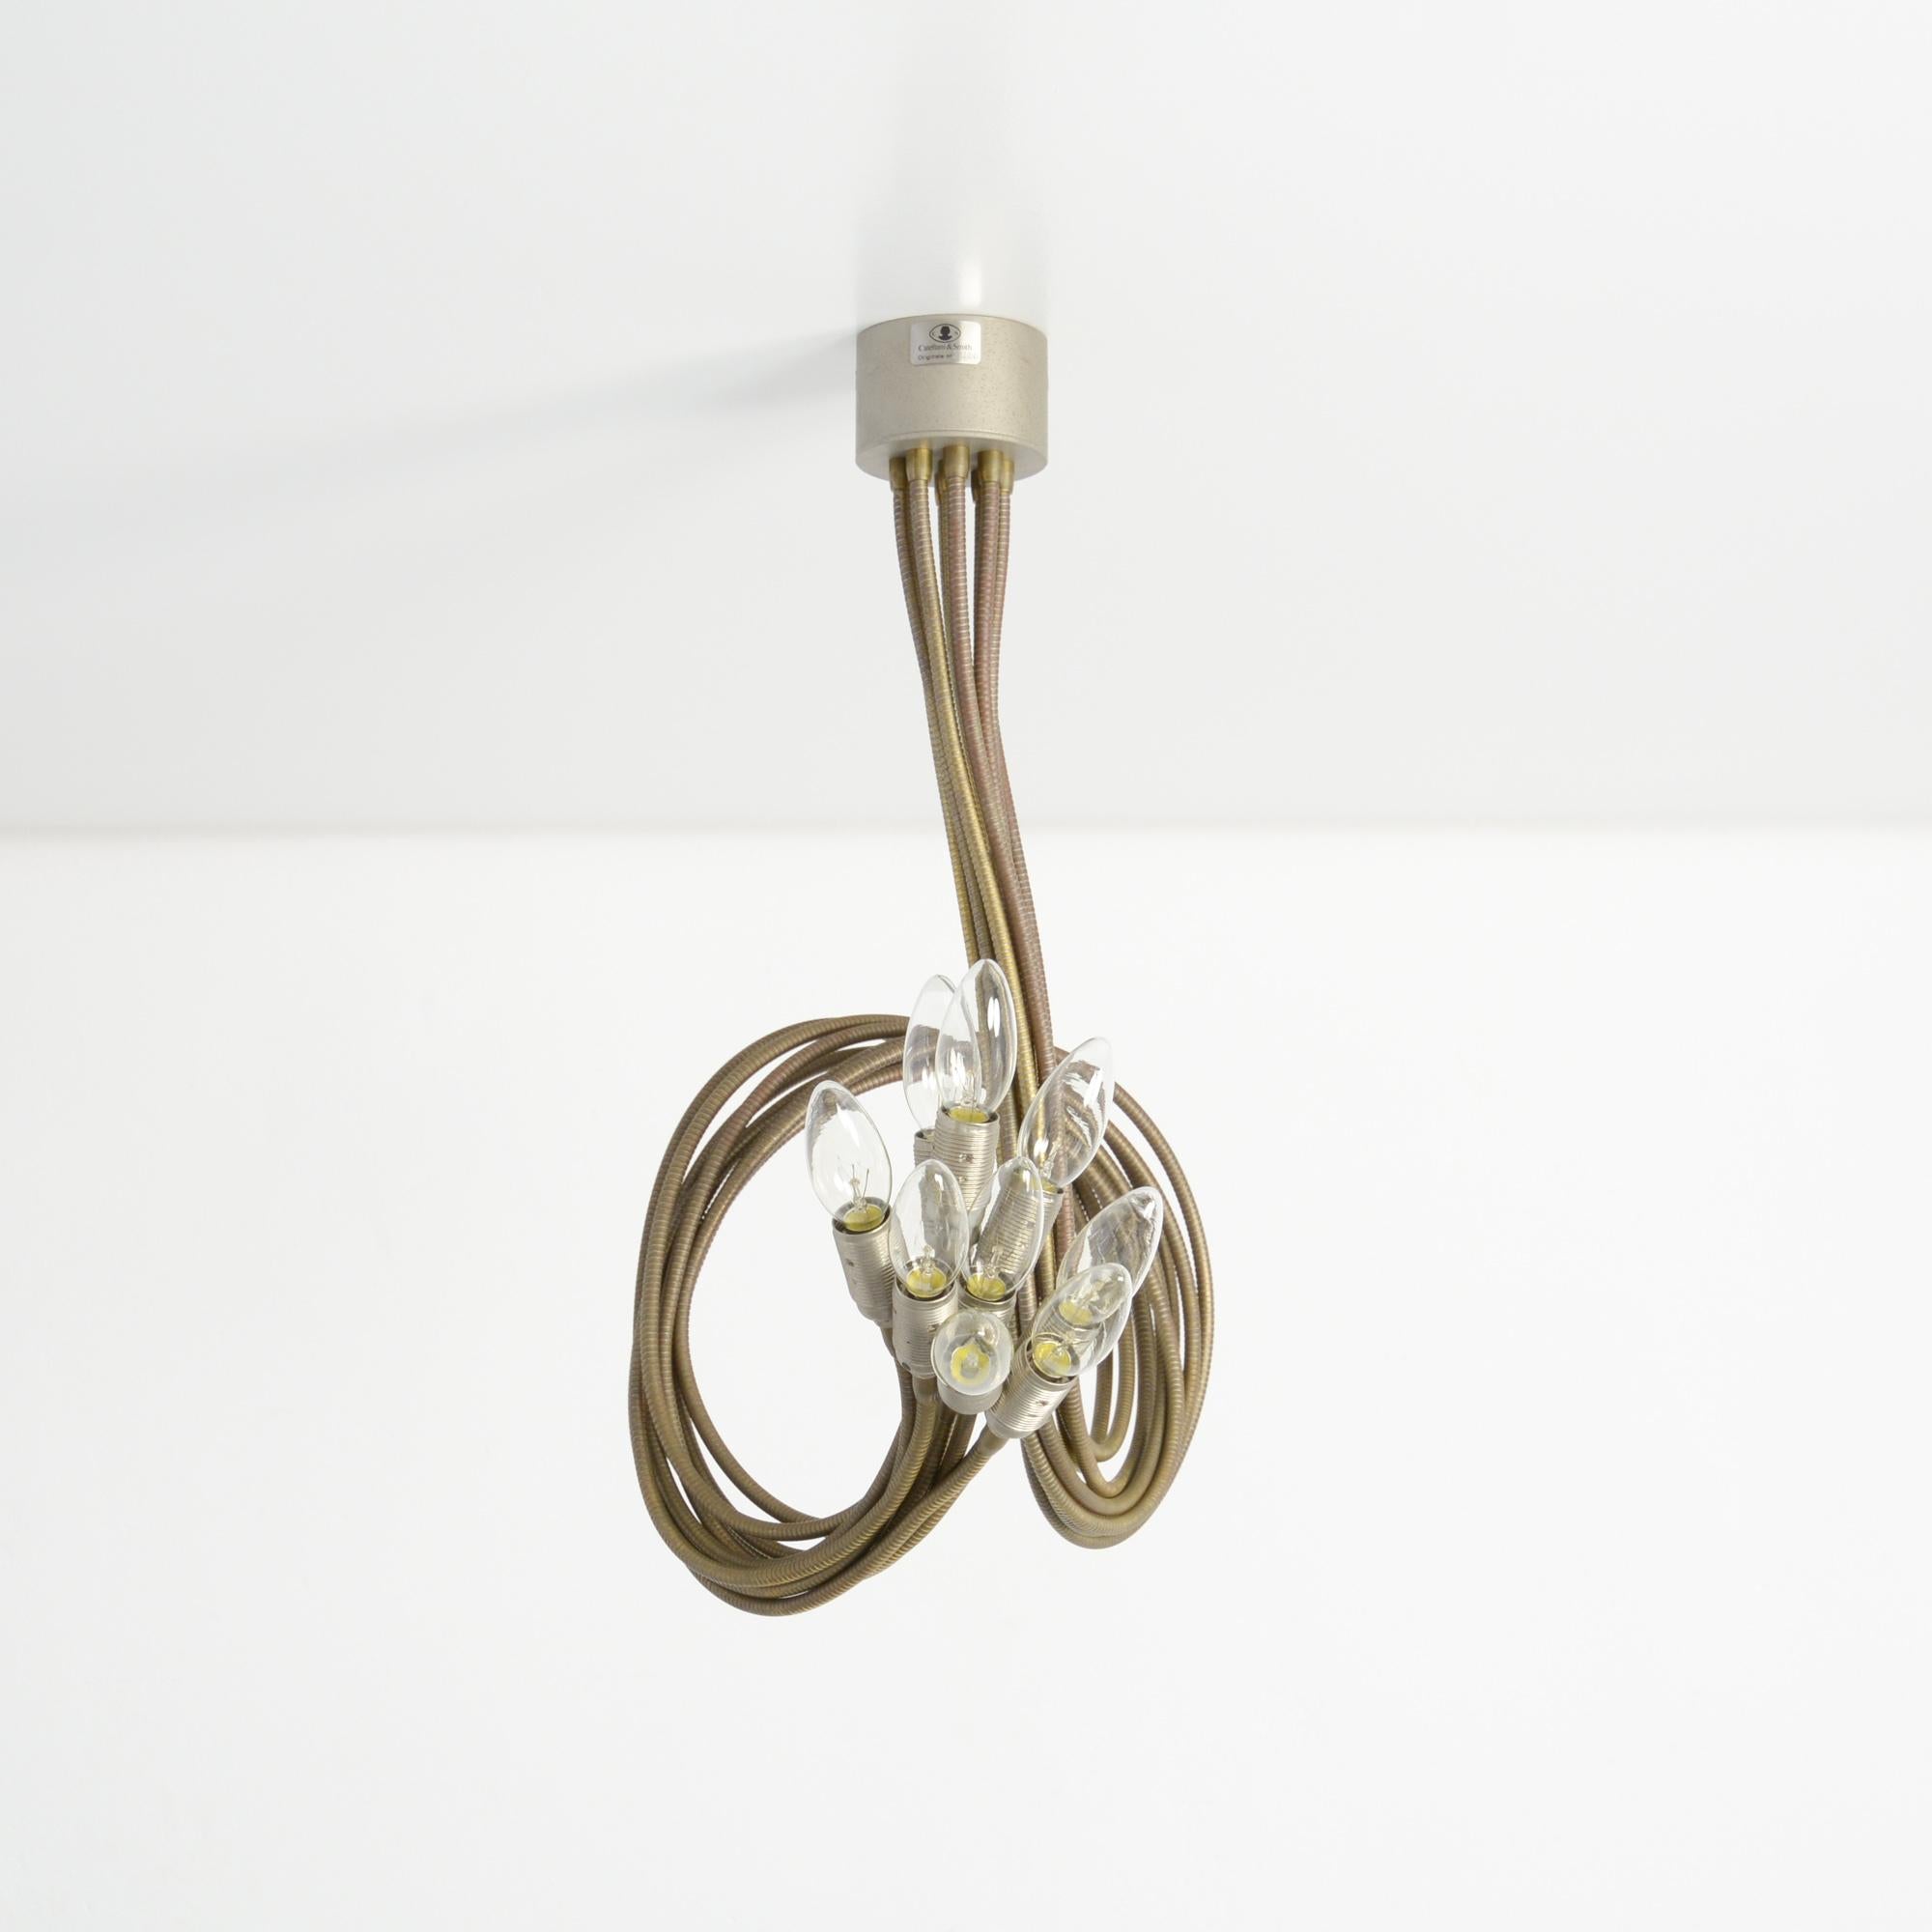 Late 20th Century Turciu 9 Wall or Ceiling Lamp by Enzo Catellani for Catellani & Smith